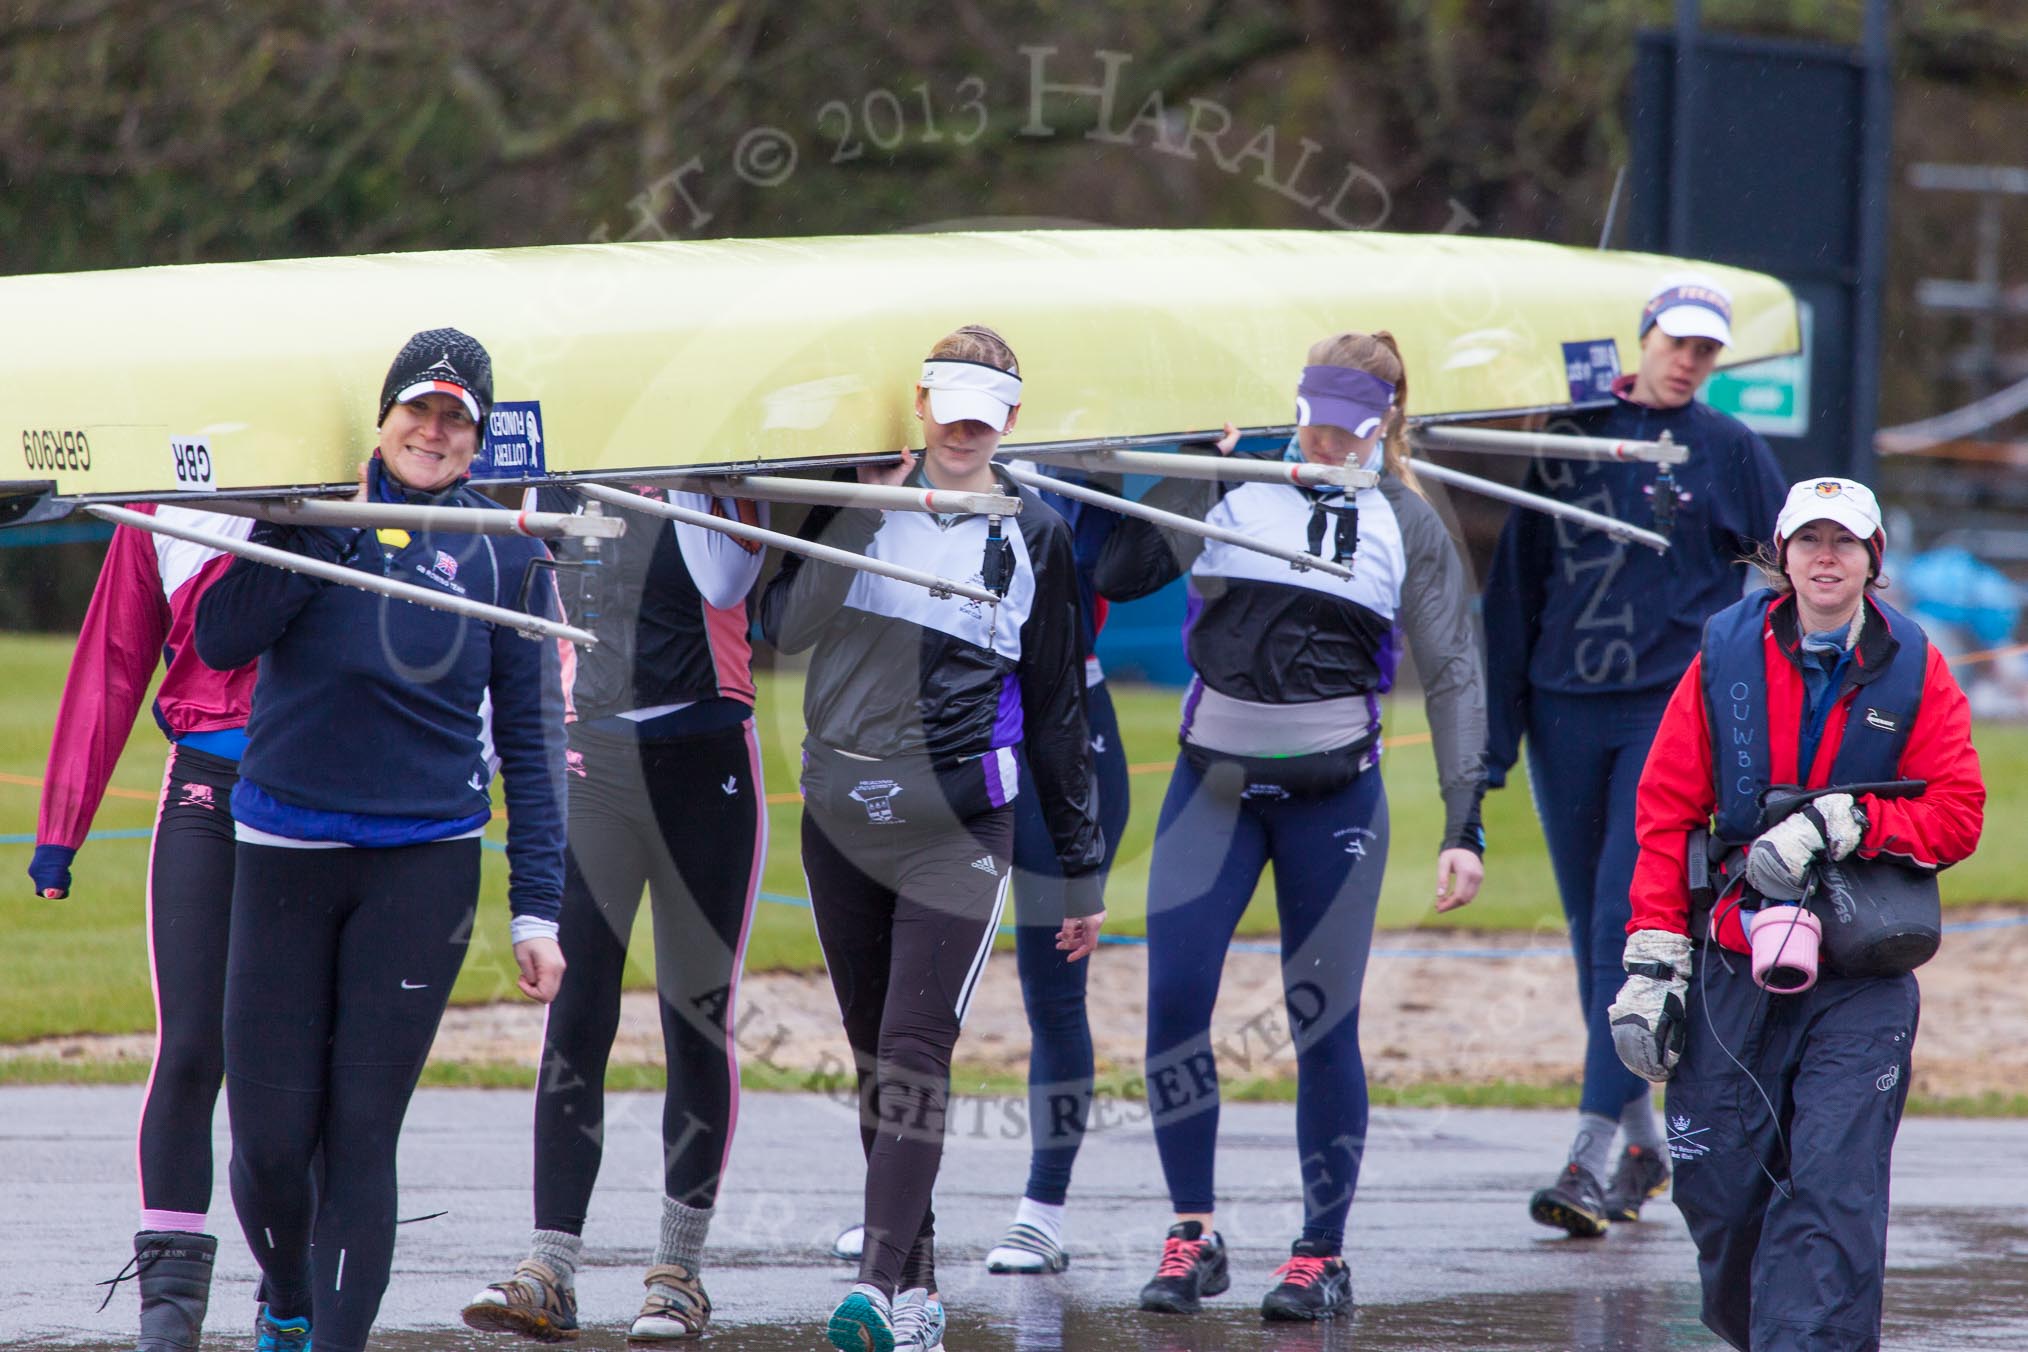 The Boat Race season 2013 - fixture OUWBC vs Olympians: The Olympians carrying their boat to Dorney Lake, on the right Kate Johnson, Bethan Walters, Christiana Amacker and Caryn Davies, with cox Victoria Stulgis..
Dorney Lake,
Dorney, Windsor,
Buckinghamshire,
United Kingdom,
on 16 March 2013 at 11:08, image #17